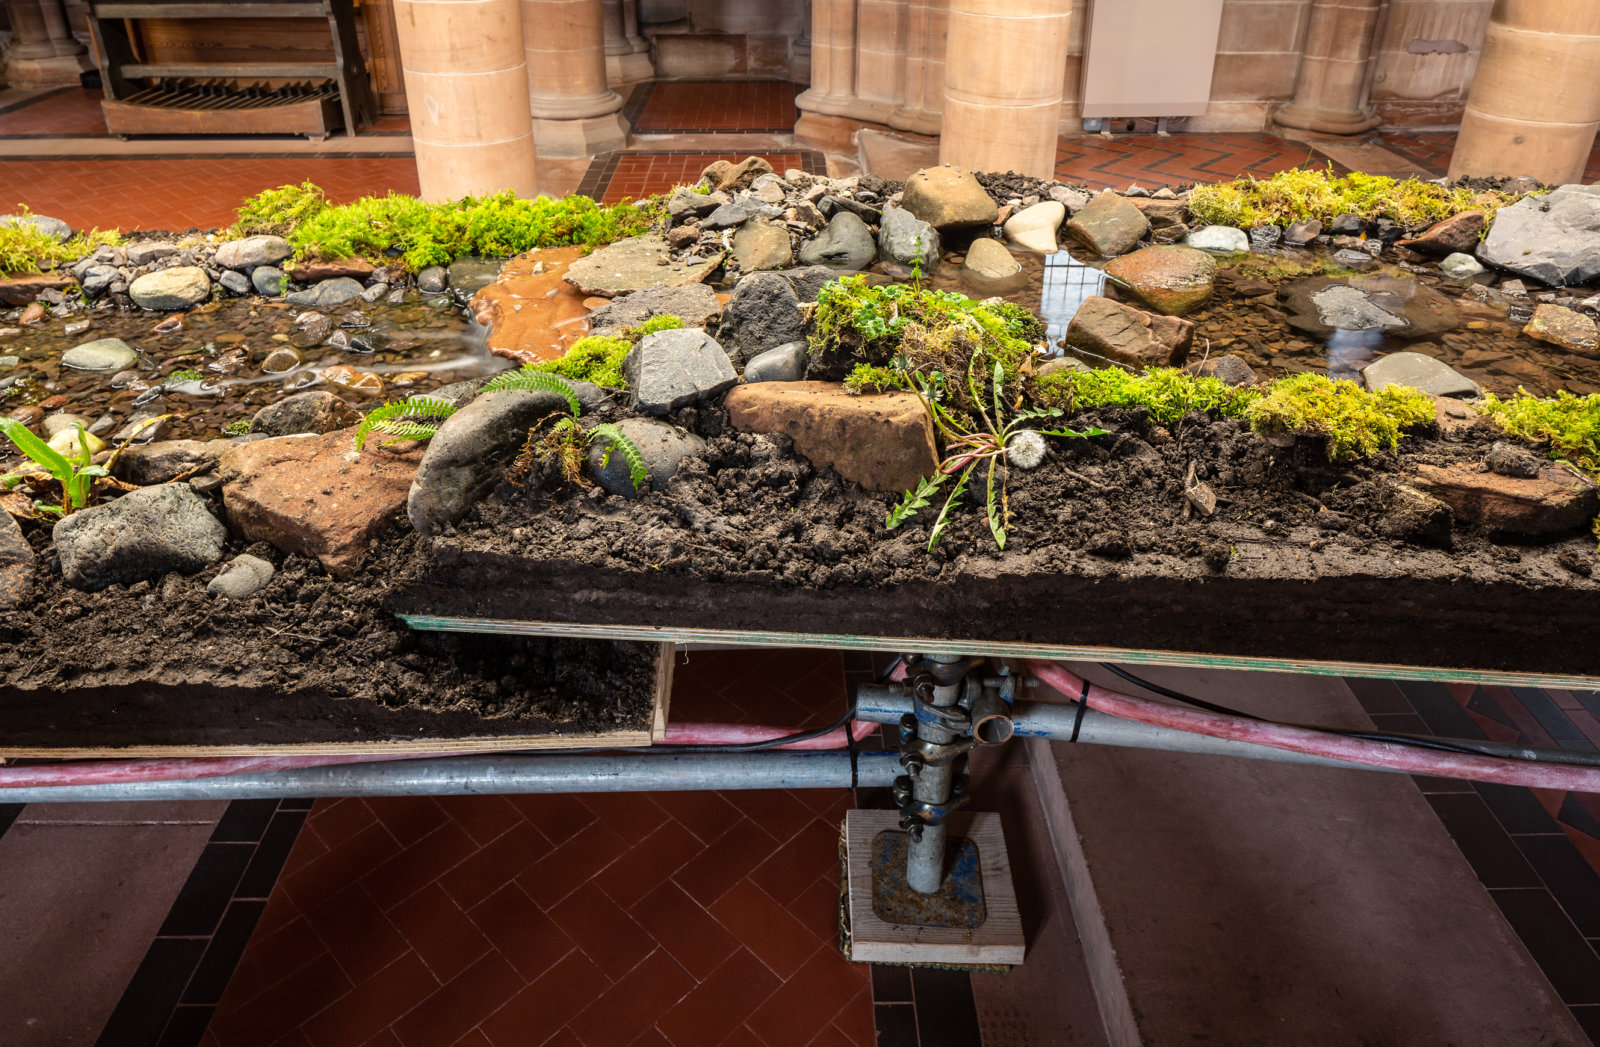 Abbas Akhavan, variations on a folly (detail), 2022, scaffold, plywood, pond liner, aggregate, clay, garden silt, soil, rocks, water, pond pump and tubing, plants sourced from the gardens, hardware, full spectrum lights, installation dimensions variable